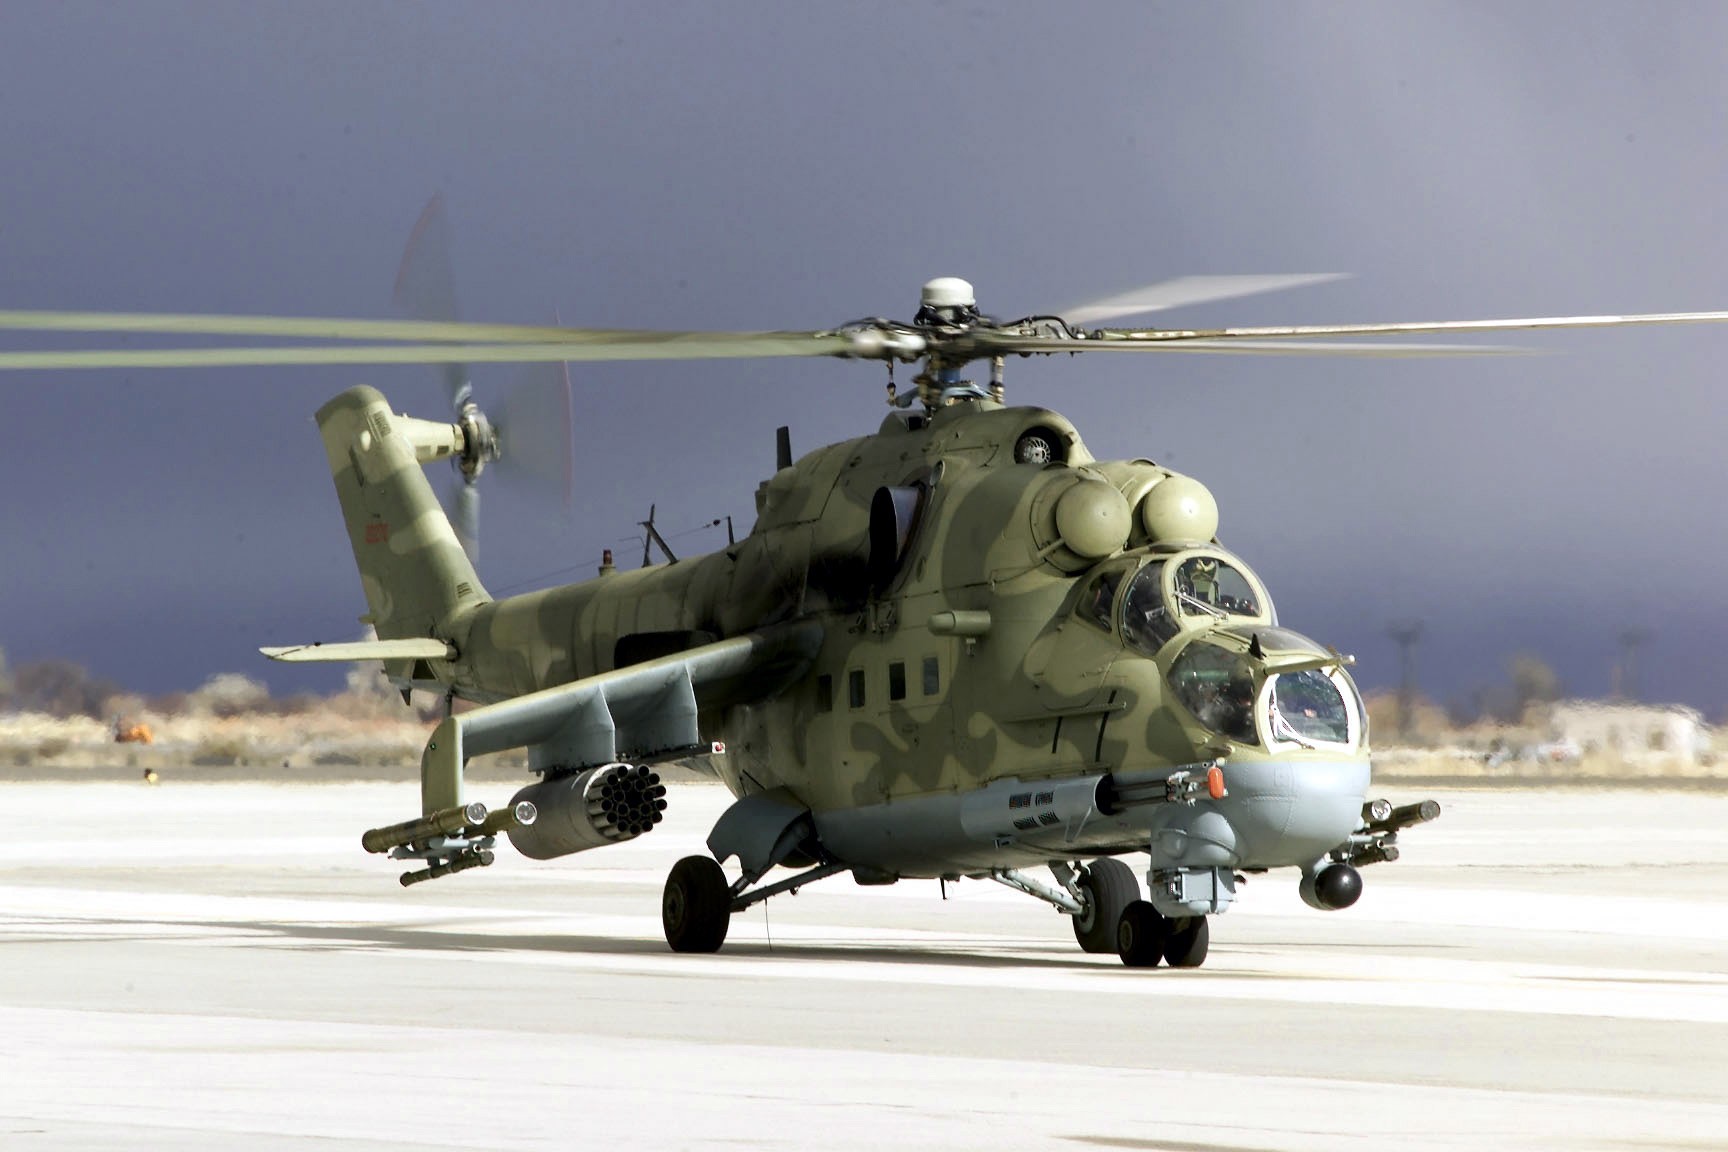 General 1728x1152 Mil Mi-24 helicopters military attack helicopters vehicle military vehicle aircraft military aircraft Russian/Soviet aircraft Mil Helicopters frontal view